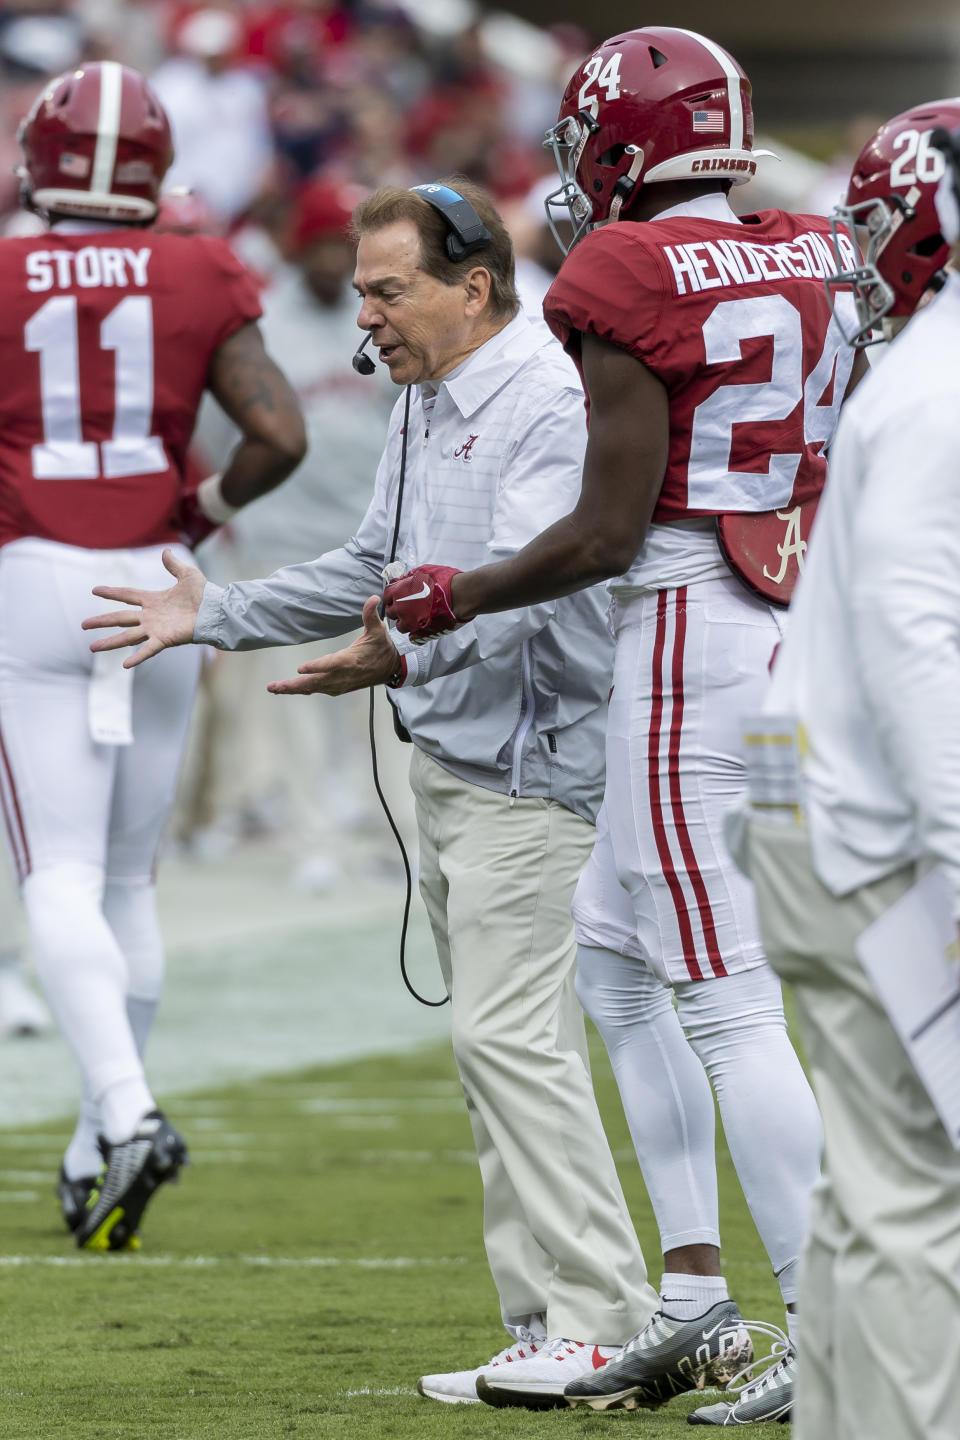 Alabama head coach Nick Saban takes issue with Alabama wide receiver/running back Emmanuel Henderson Jr. (24) after he left the end zone on a kickoff during the first half of an NCAA college football game against Austin Peay, Saturday, Nov. 19, 2022, in Tuscaloosa, Ala. (AP Photo/Vasha Hunt)